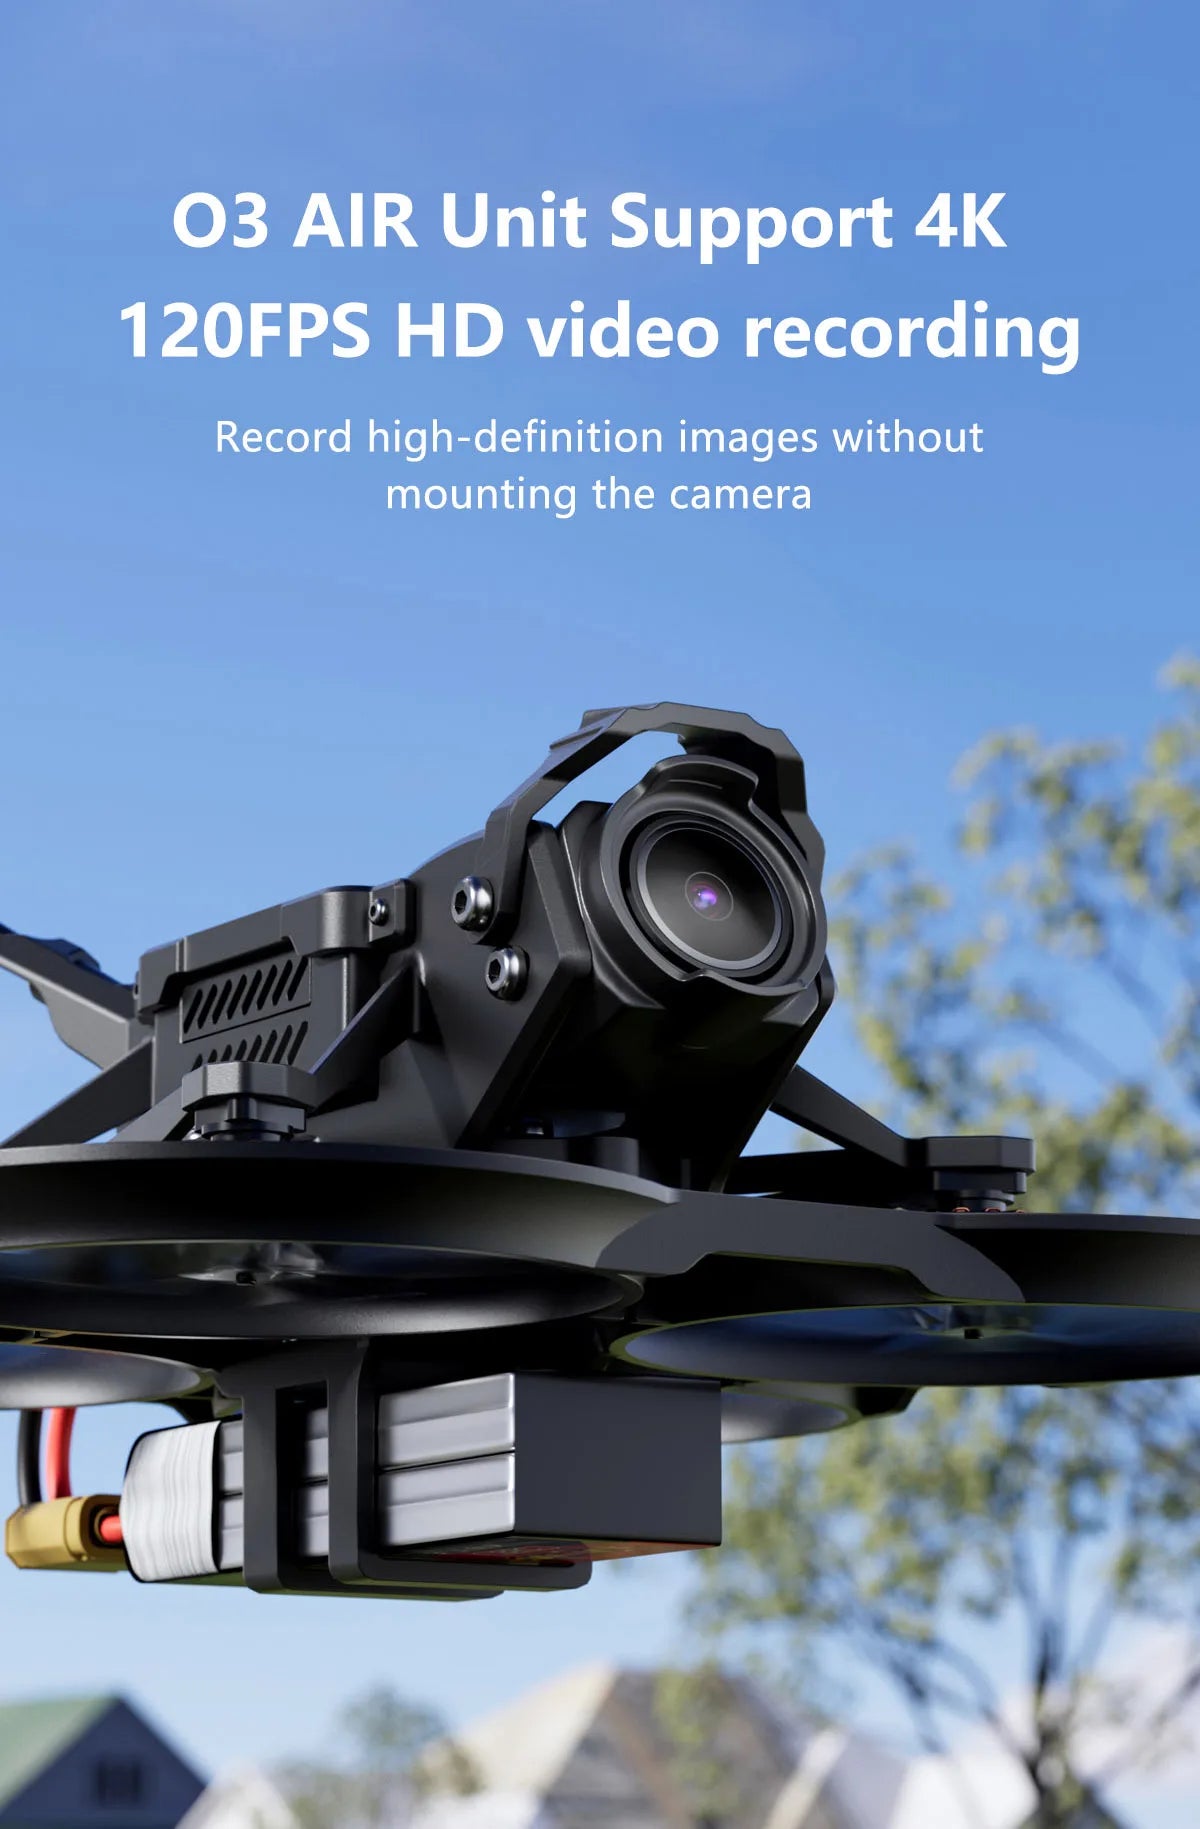 GEPRC DarkStar20 HD O3 Cinewhoop, 03 AIR Unit Support 4K 120FPS HD video recording Record high-definition